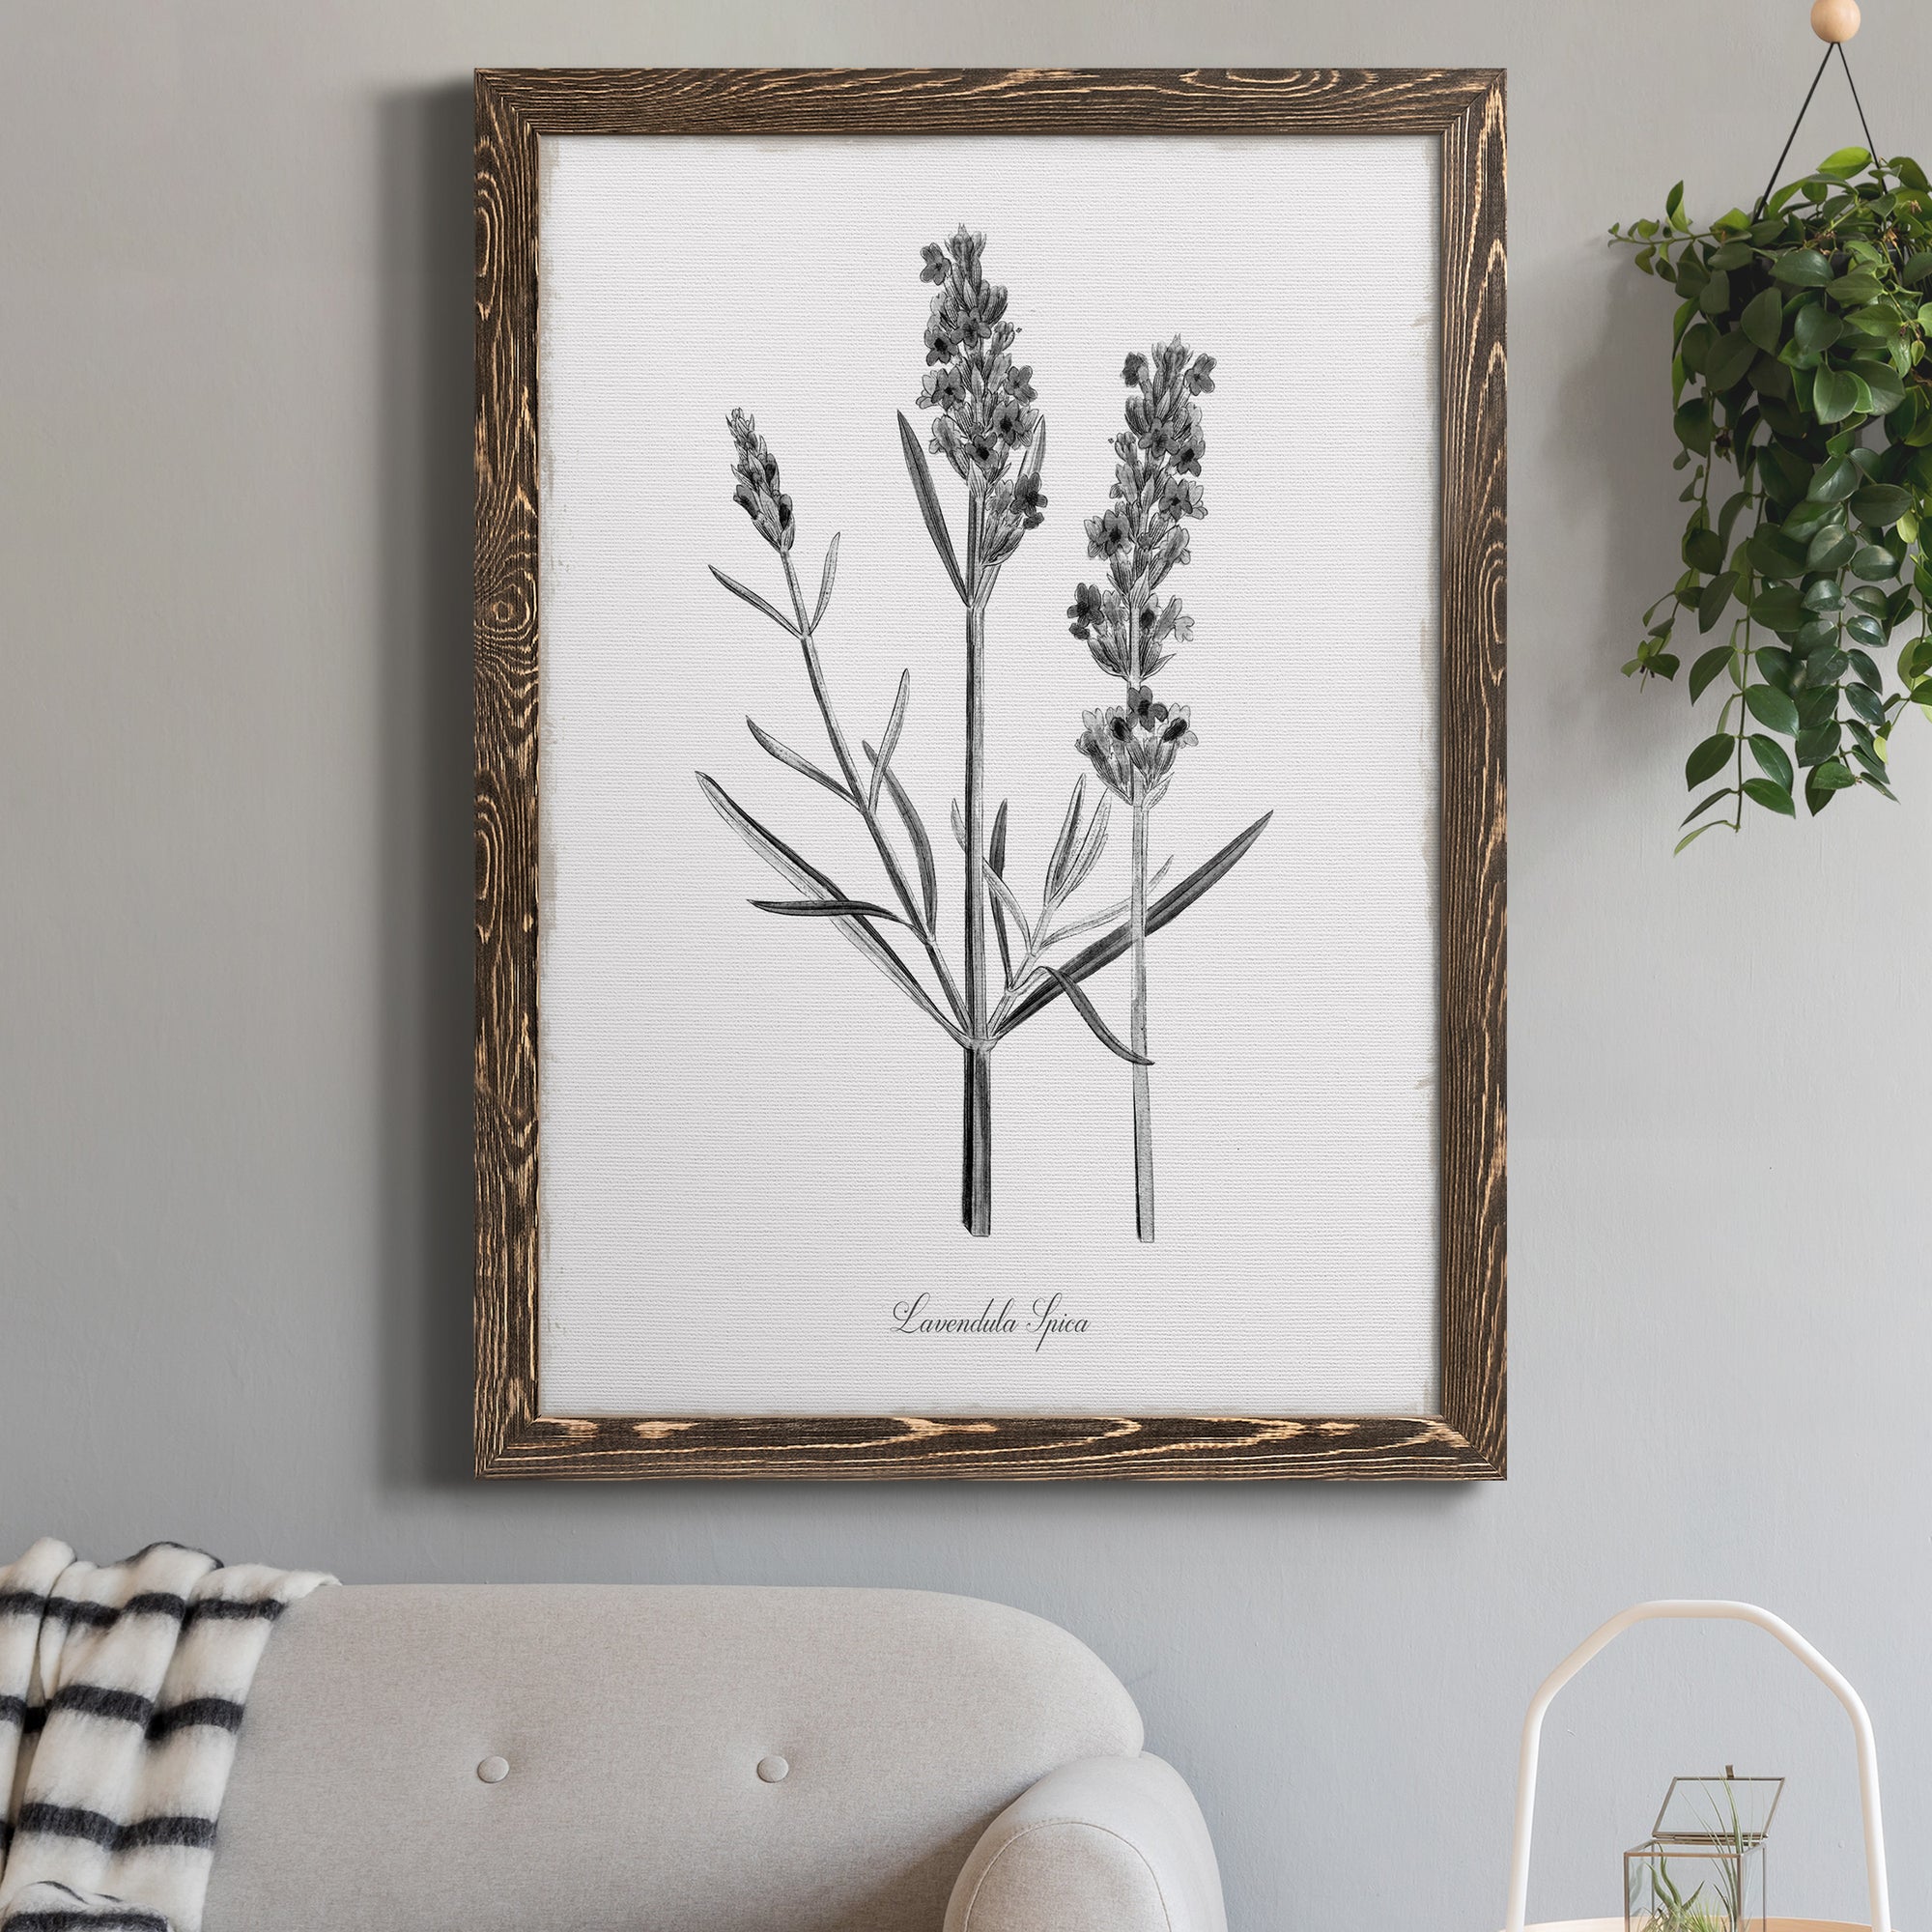 Simply Lavender - Premium Canvas Framed in Barnwood - Ready to Hang